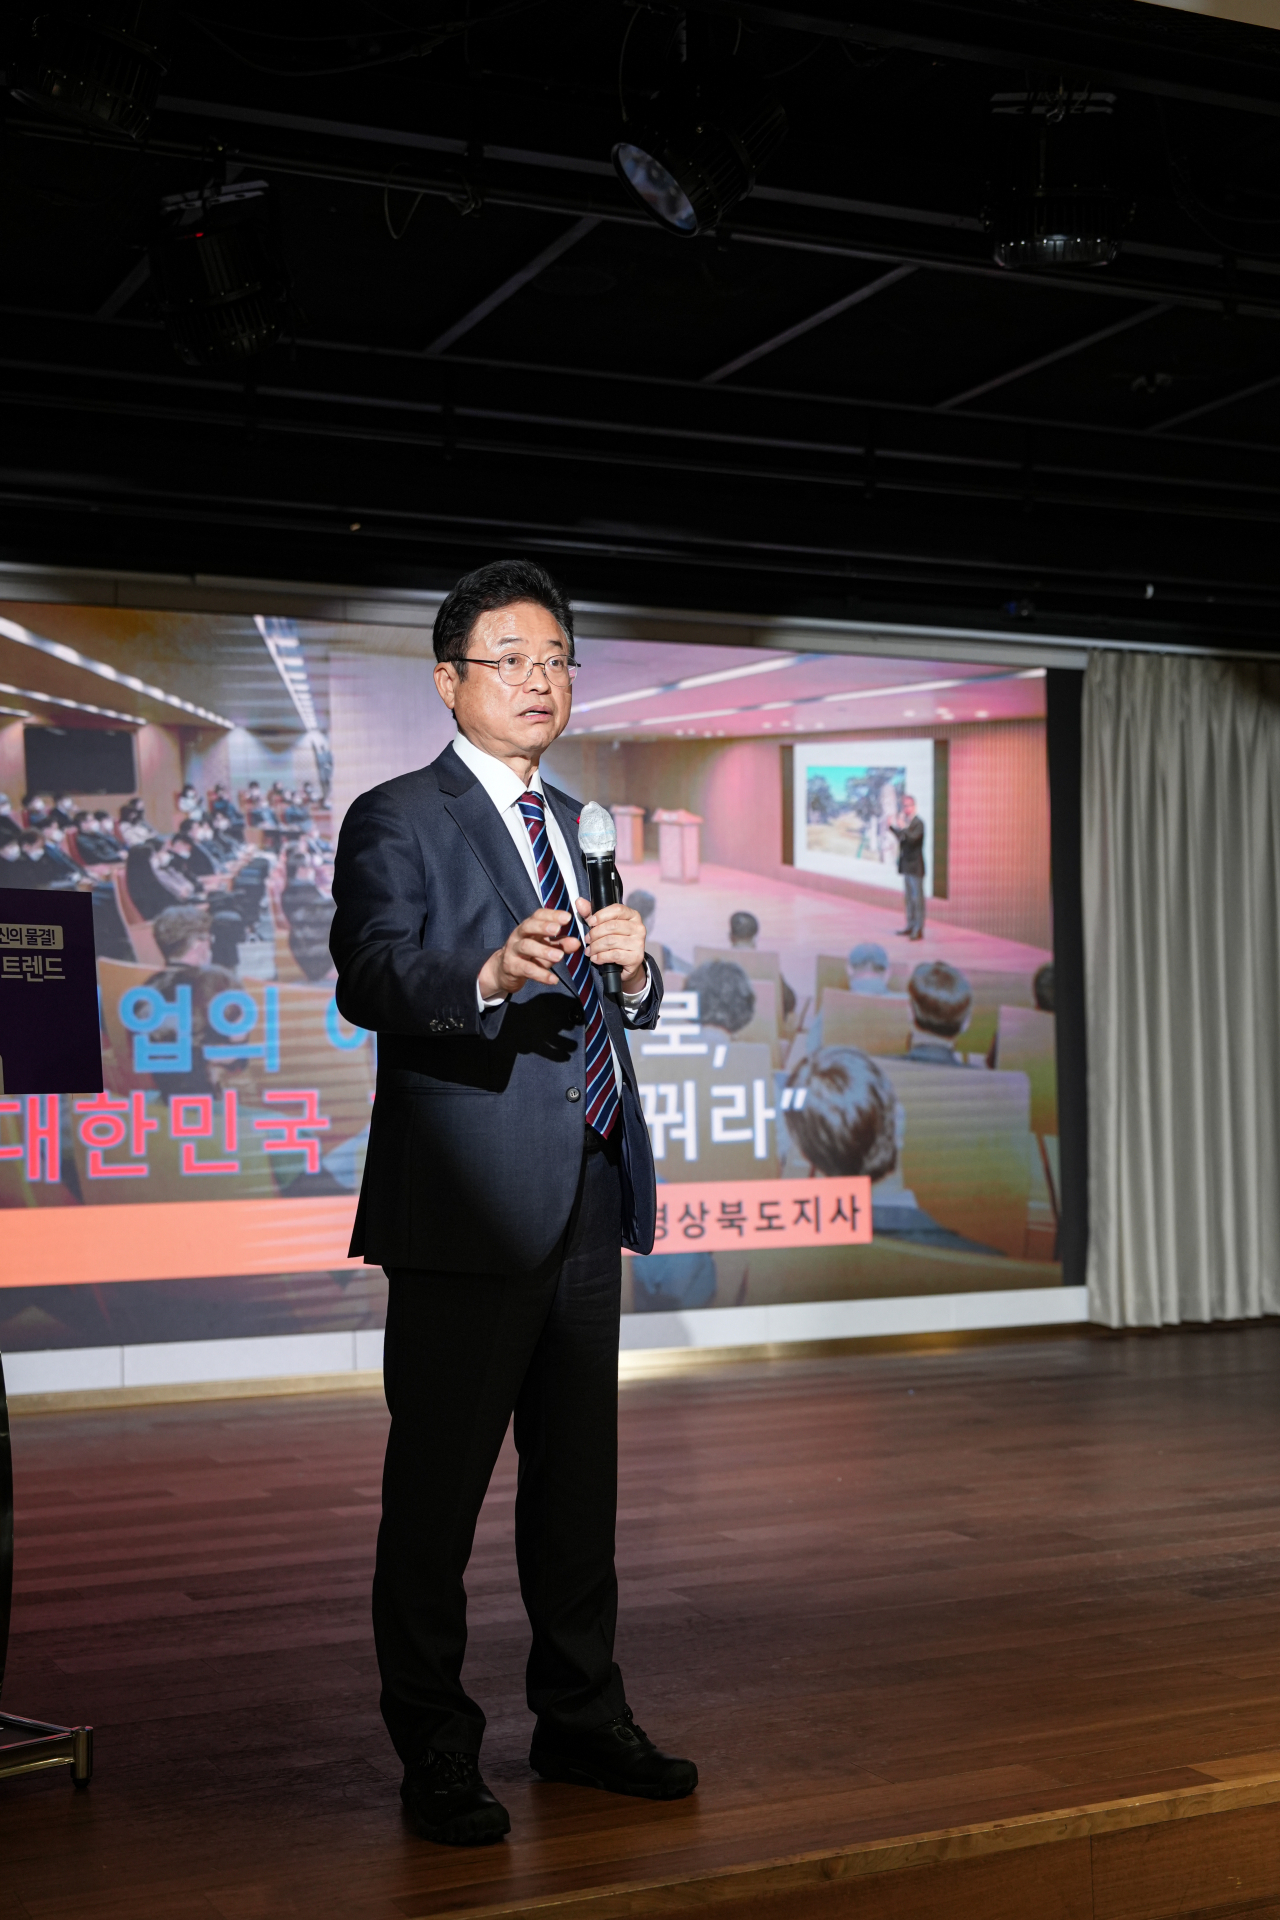 Lee Cheol-woo, the Governor of North Gyeongsang Province, speaks at the Global Biz Forum held by The Korea Herald on Wednesday. (GBF)